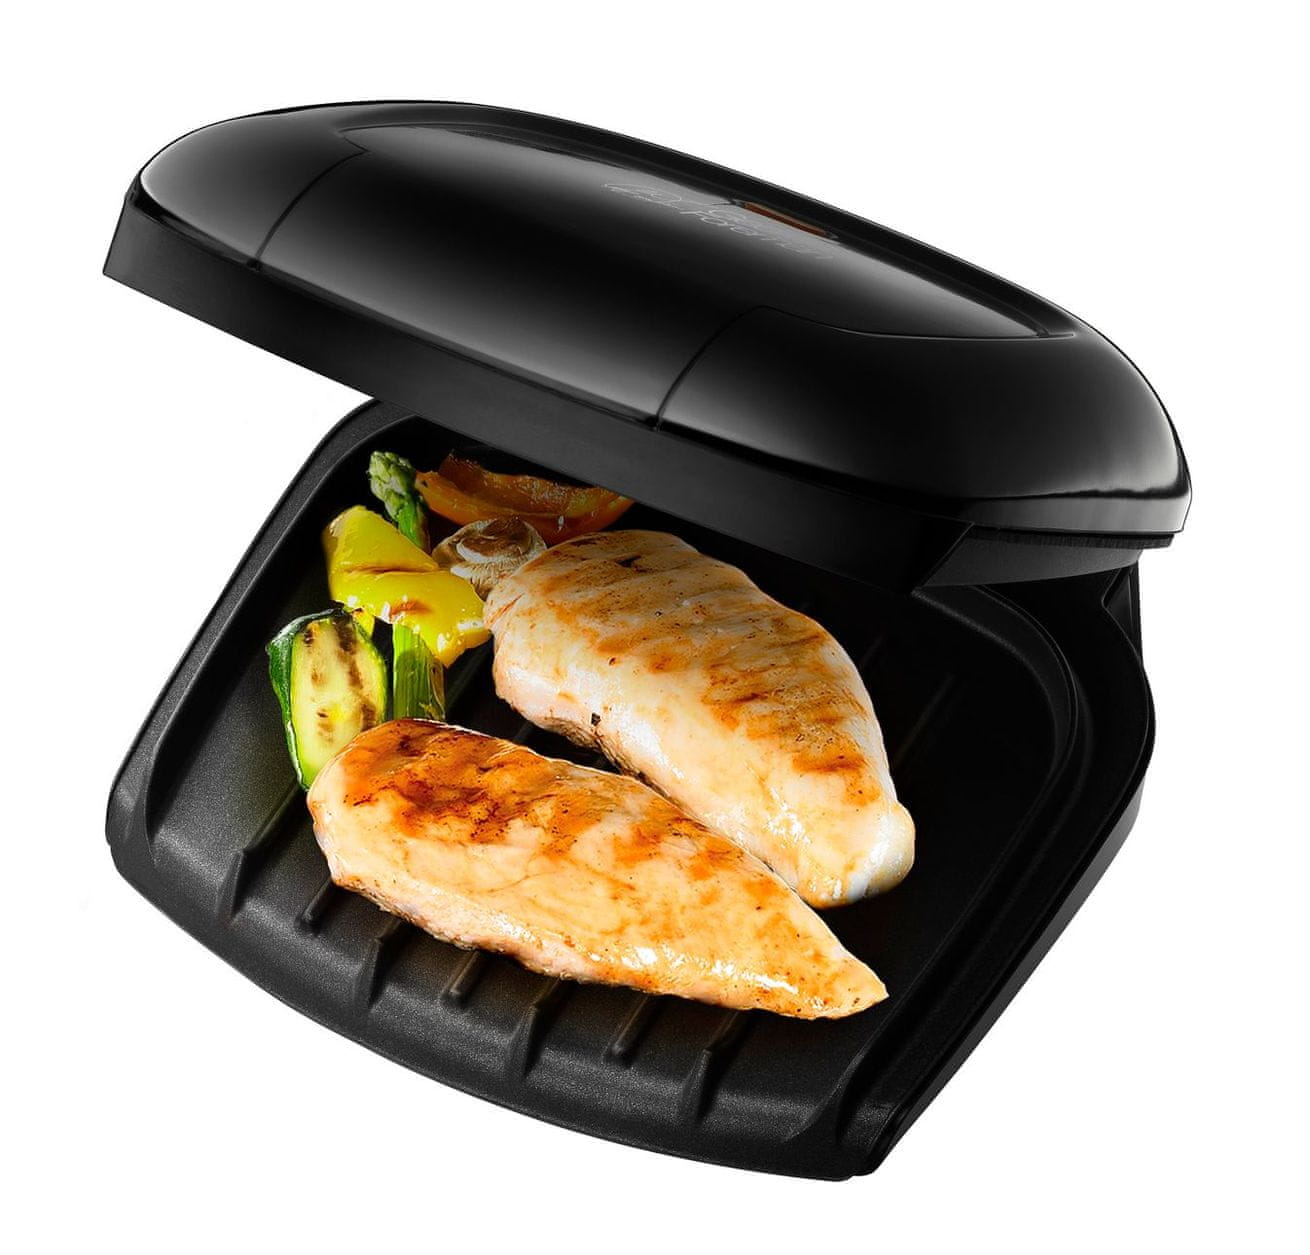 George Foreman 18840-56 Compact Grill